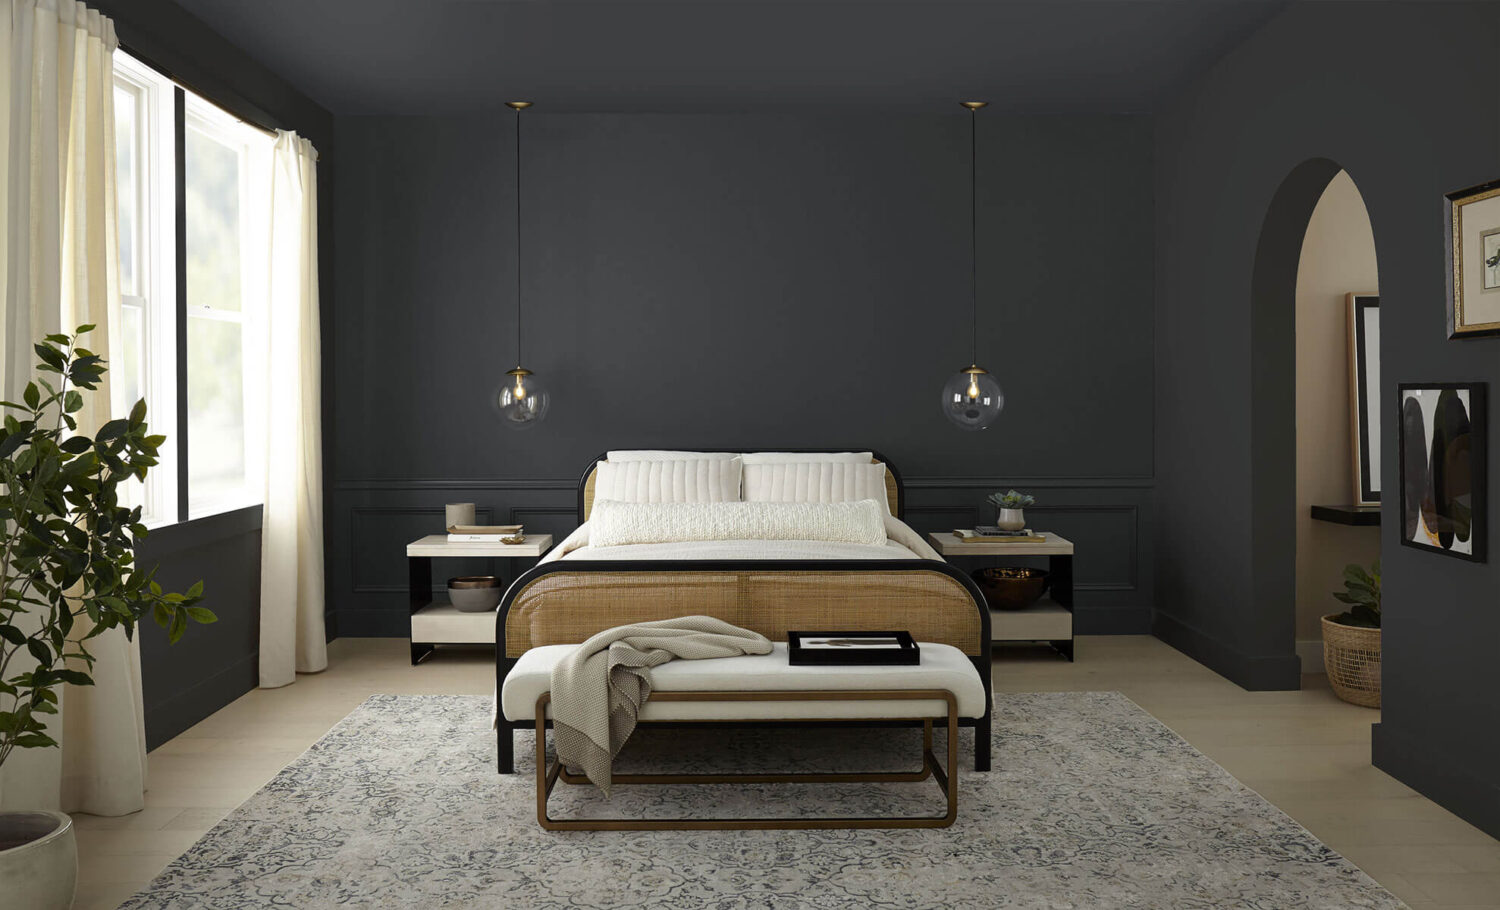 behr-cracked-pepper-color-of-the-year-bedroom-color-nordroom